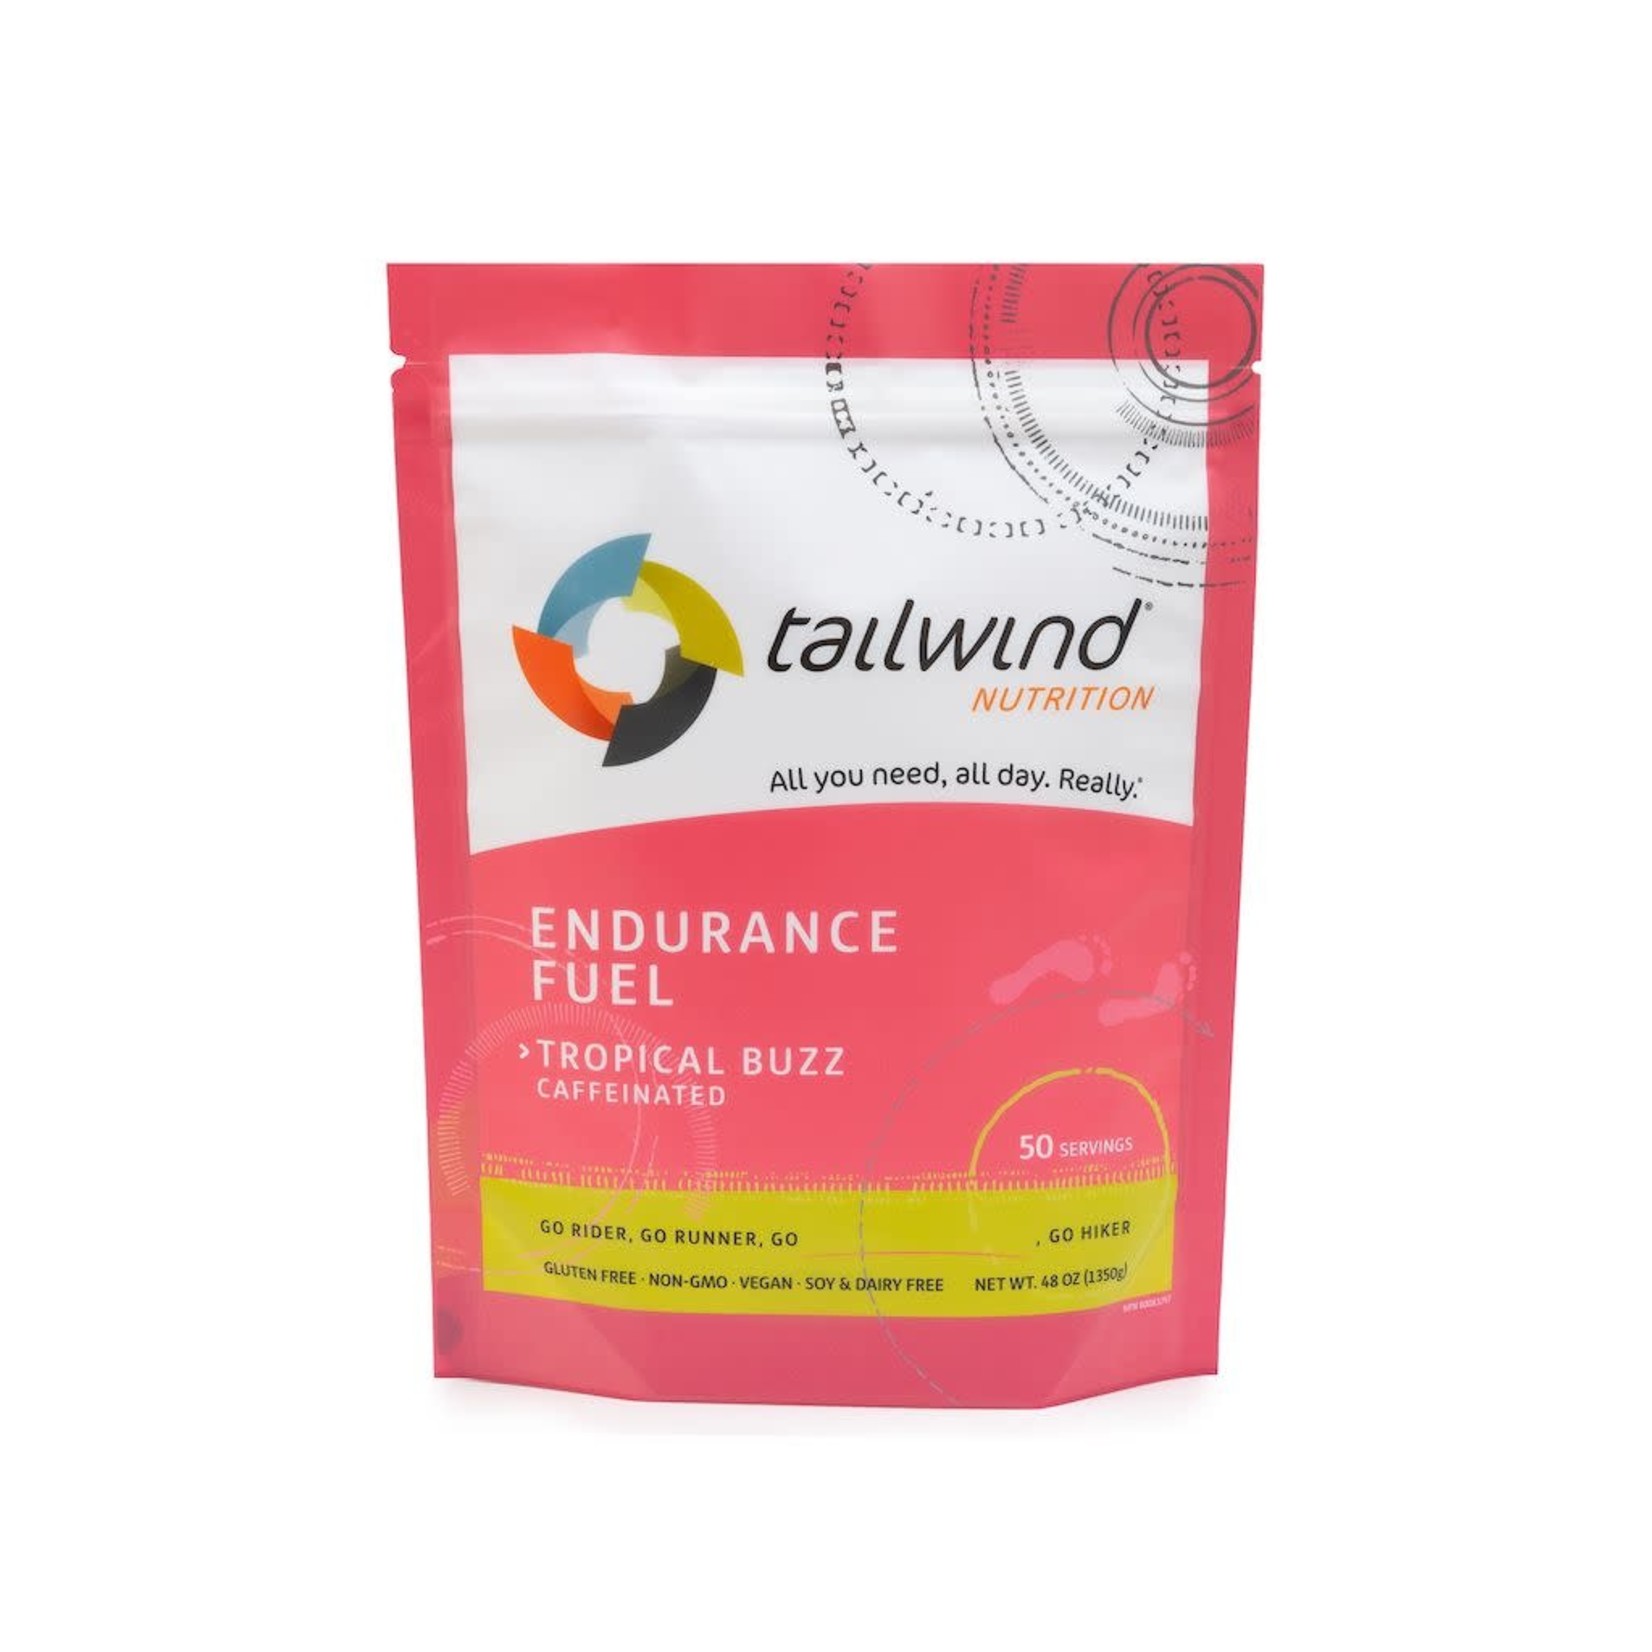 Tailwind Nutrition Endurance Fuel Tailwind Caffeinated Tropical Buzz (50 servings)